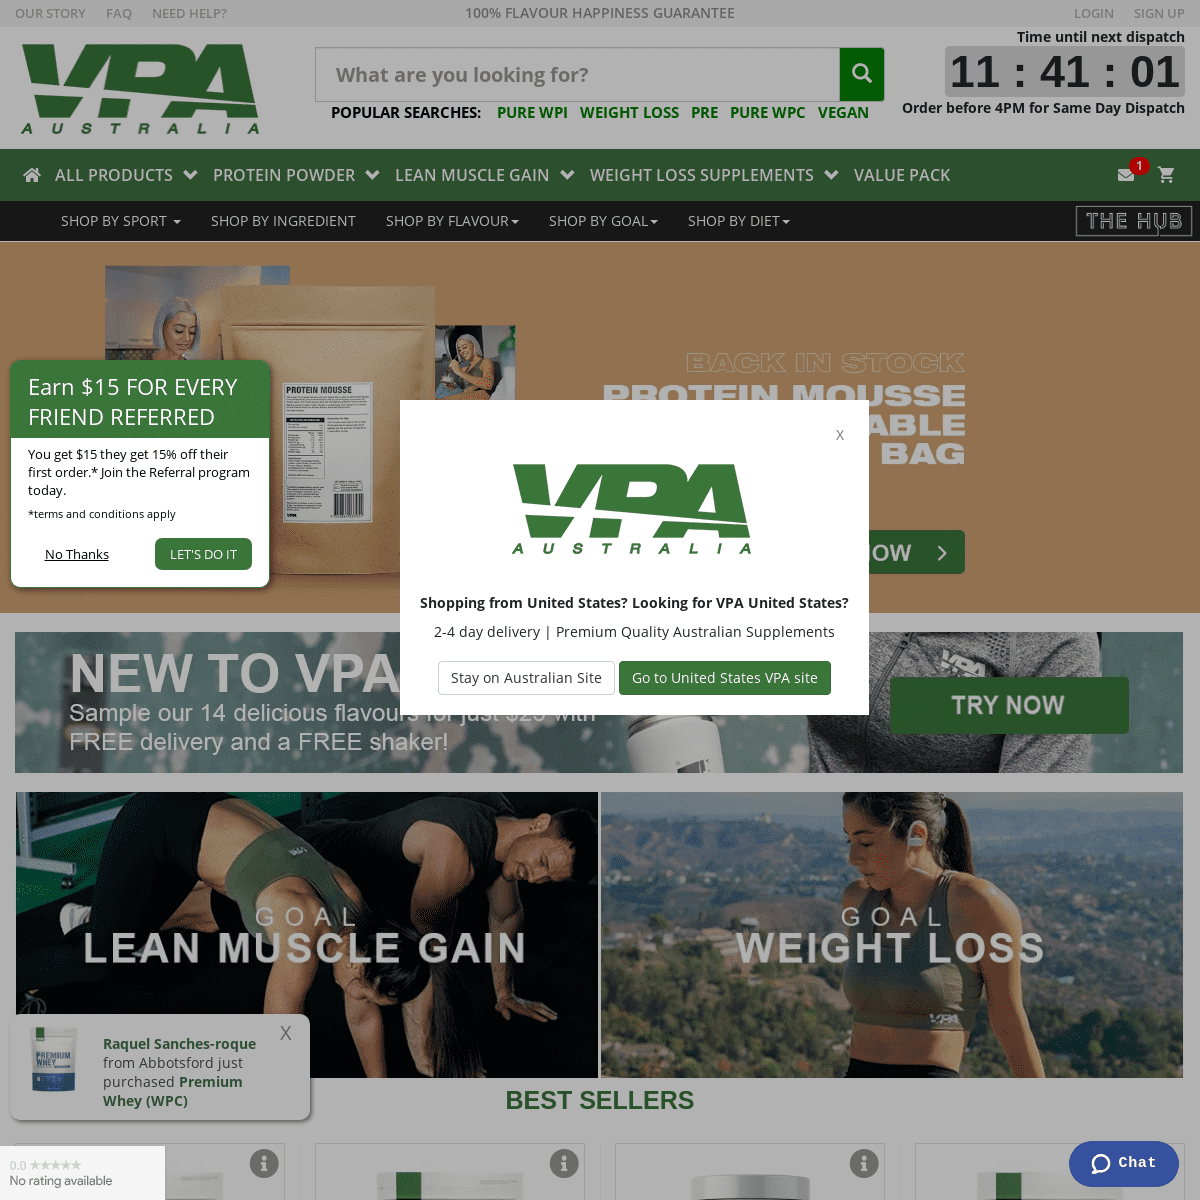 VPA - Australia's Favourite Online Supplement Brand - Endorsed By Cameron Smith